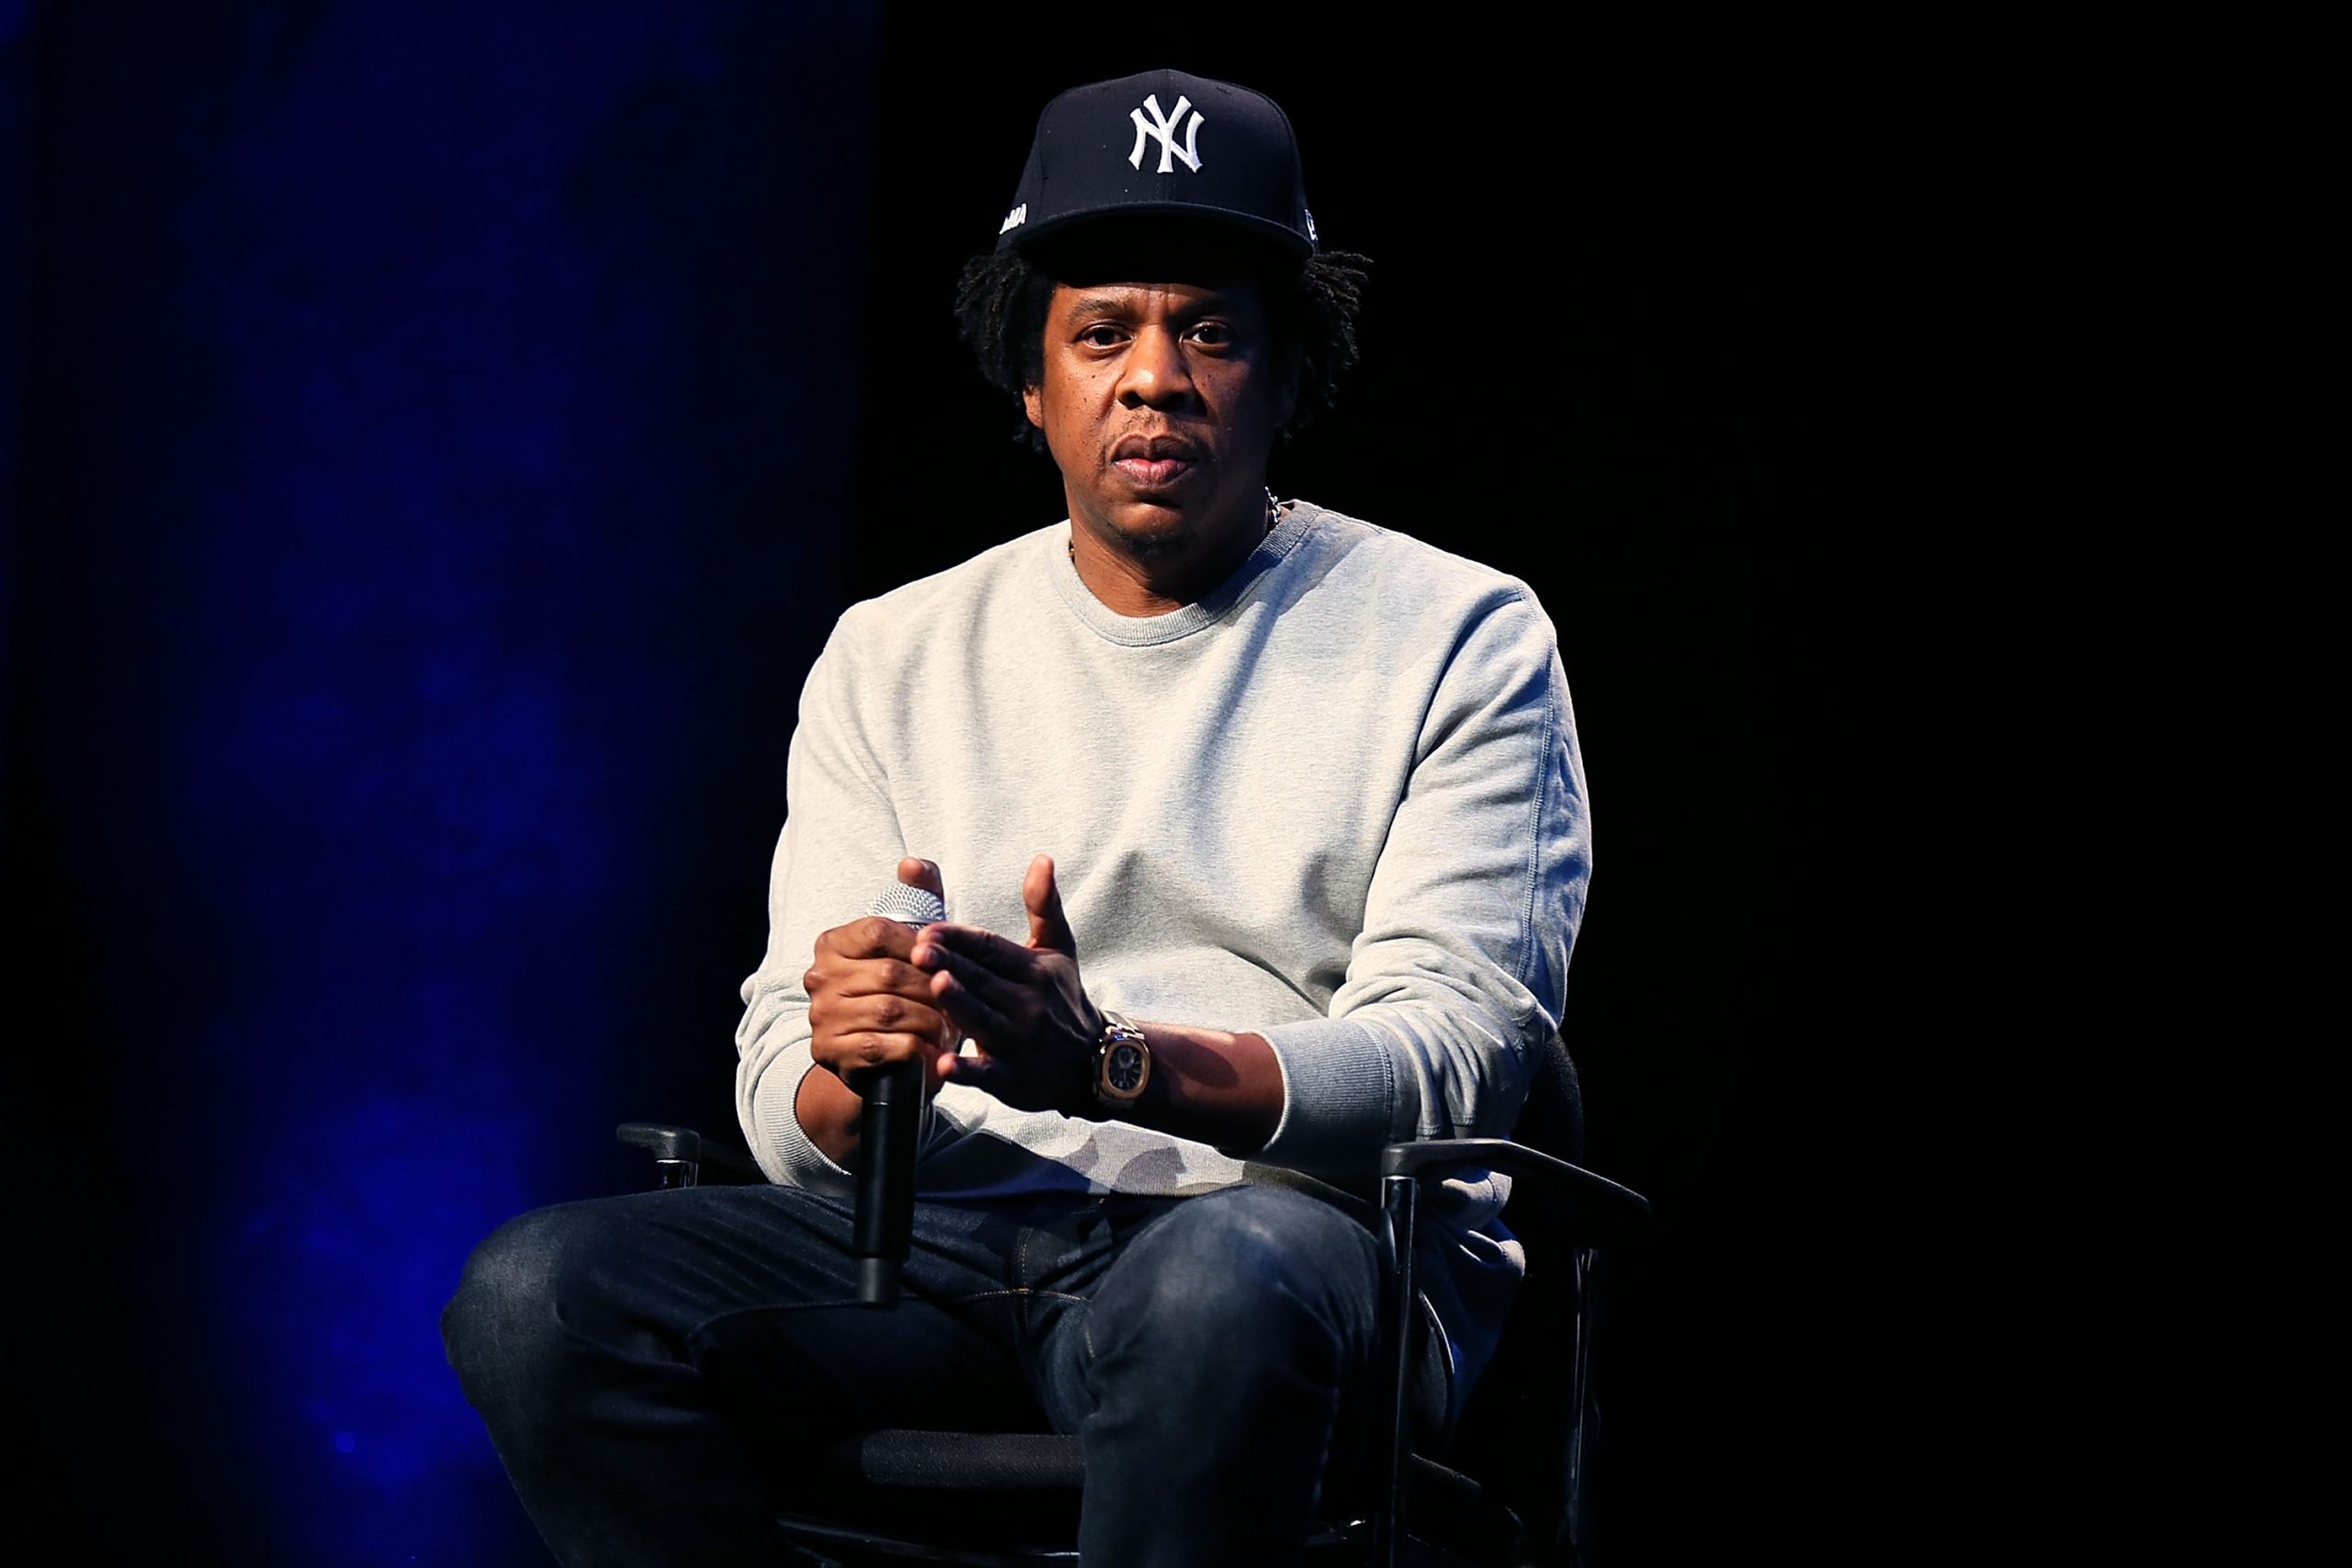 Jay-Z unveils new Brooklyn Nets jersey at his own concert last night